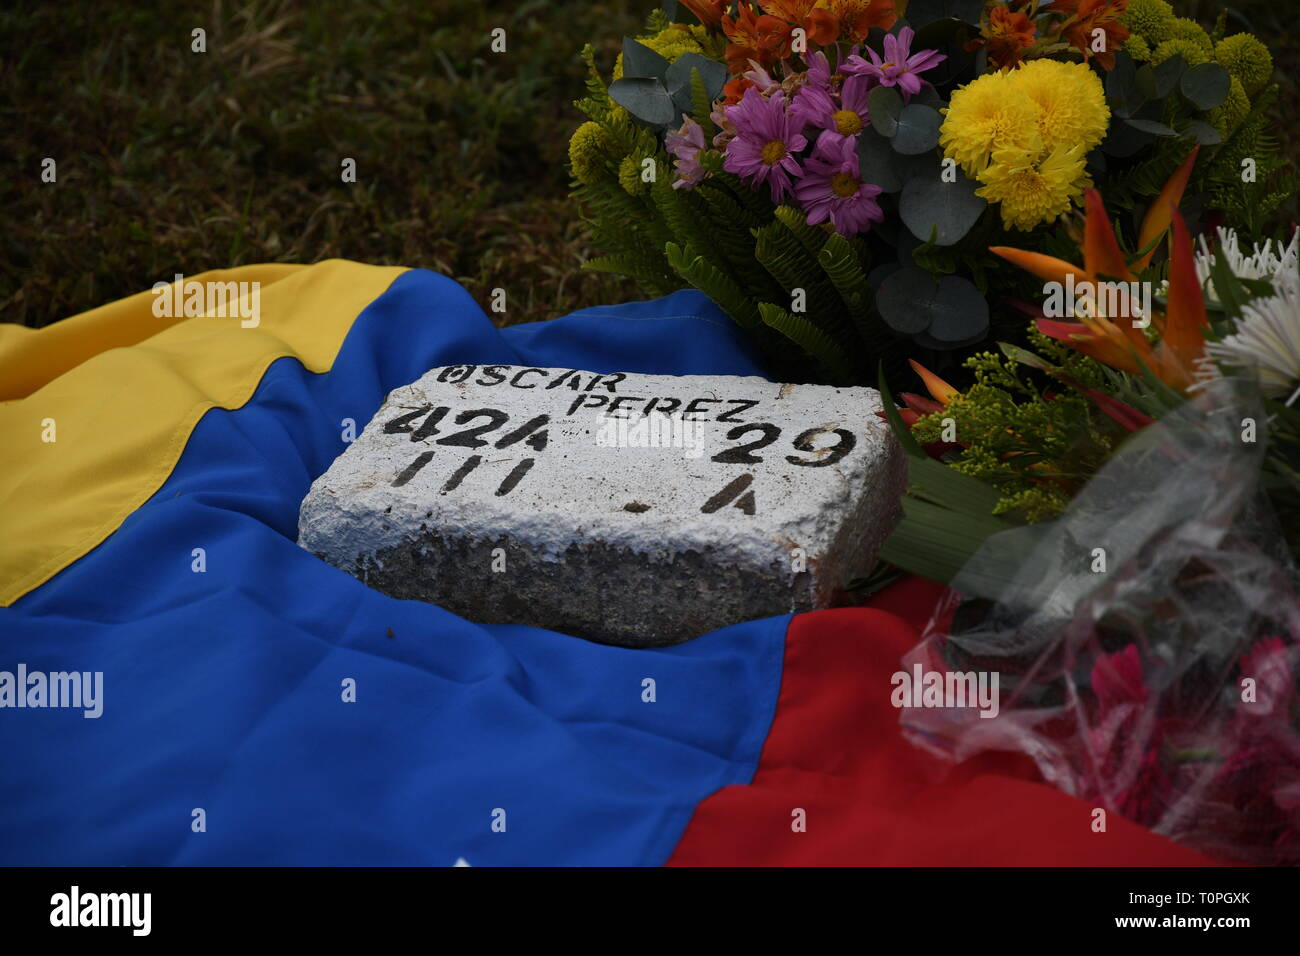 Caracas, Venezuela. 21st Jan, 2018. The tomb stone seen on the Oscar Perez grave during his funeral.The body of Oscar Perez, inspector of the scientific police, was buried in the Eastern Cemetery. The funeral was guarded by officials of the National Guard and only her aunt could see the body and witness the funeral. The cemetery was closed until 8:00 am when the national guard decided to retire and allow access to the public. Civil society and family members paid respect to the tomb of the inspector. Credit: Roman Camacho/SOPA/ZUMA Wire/Alamy Live News Stock Photo